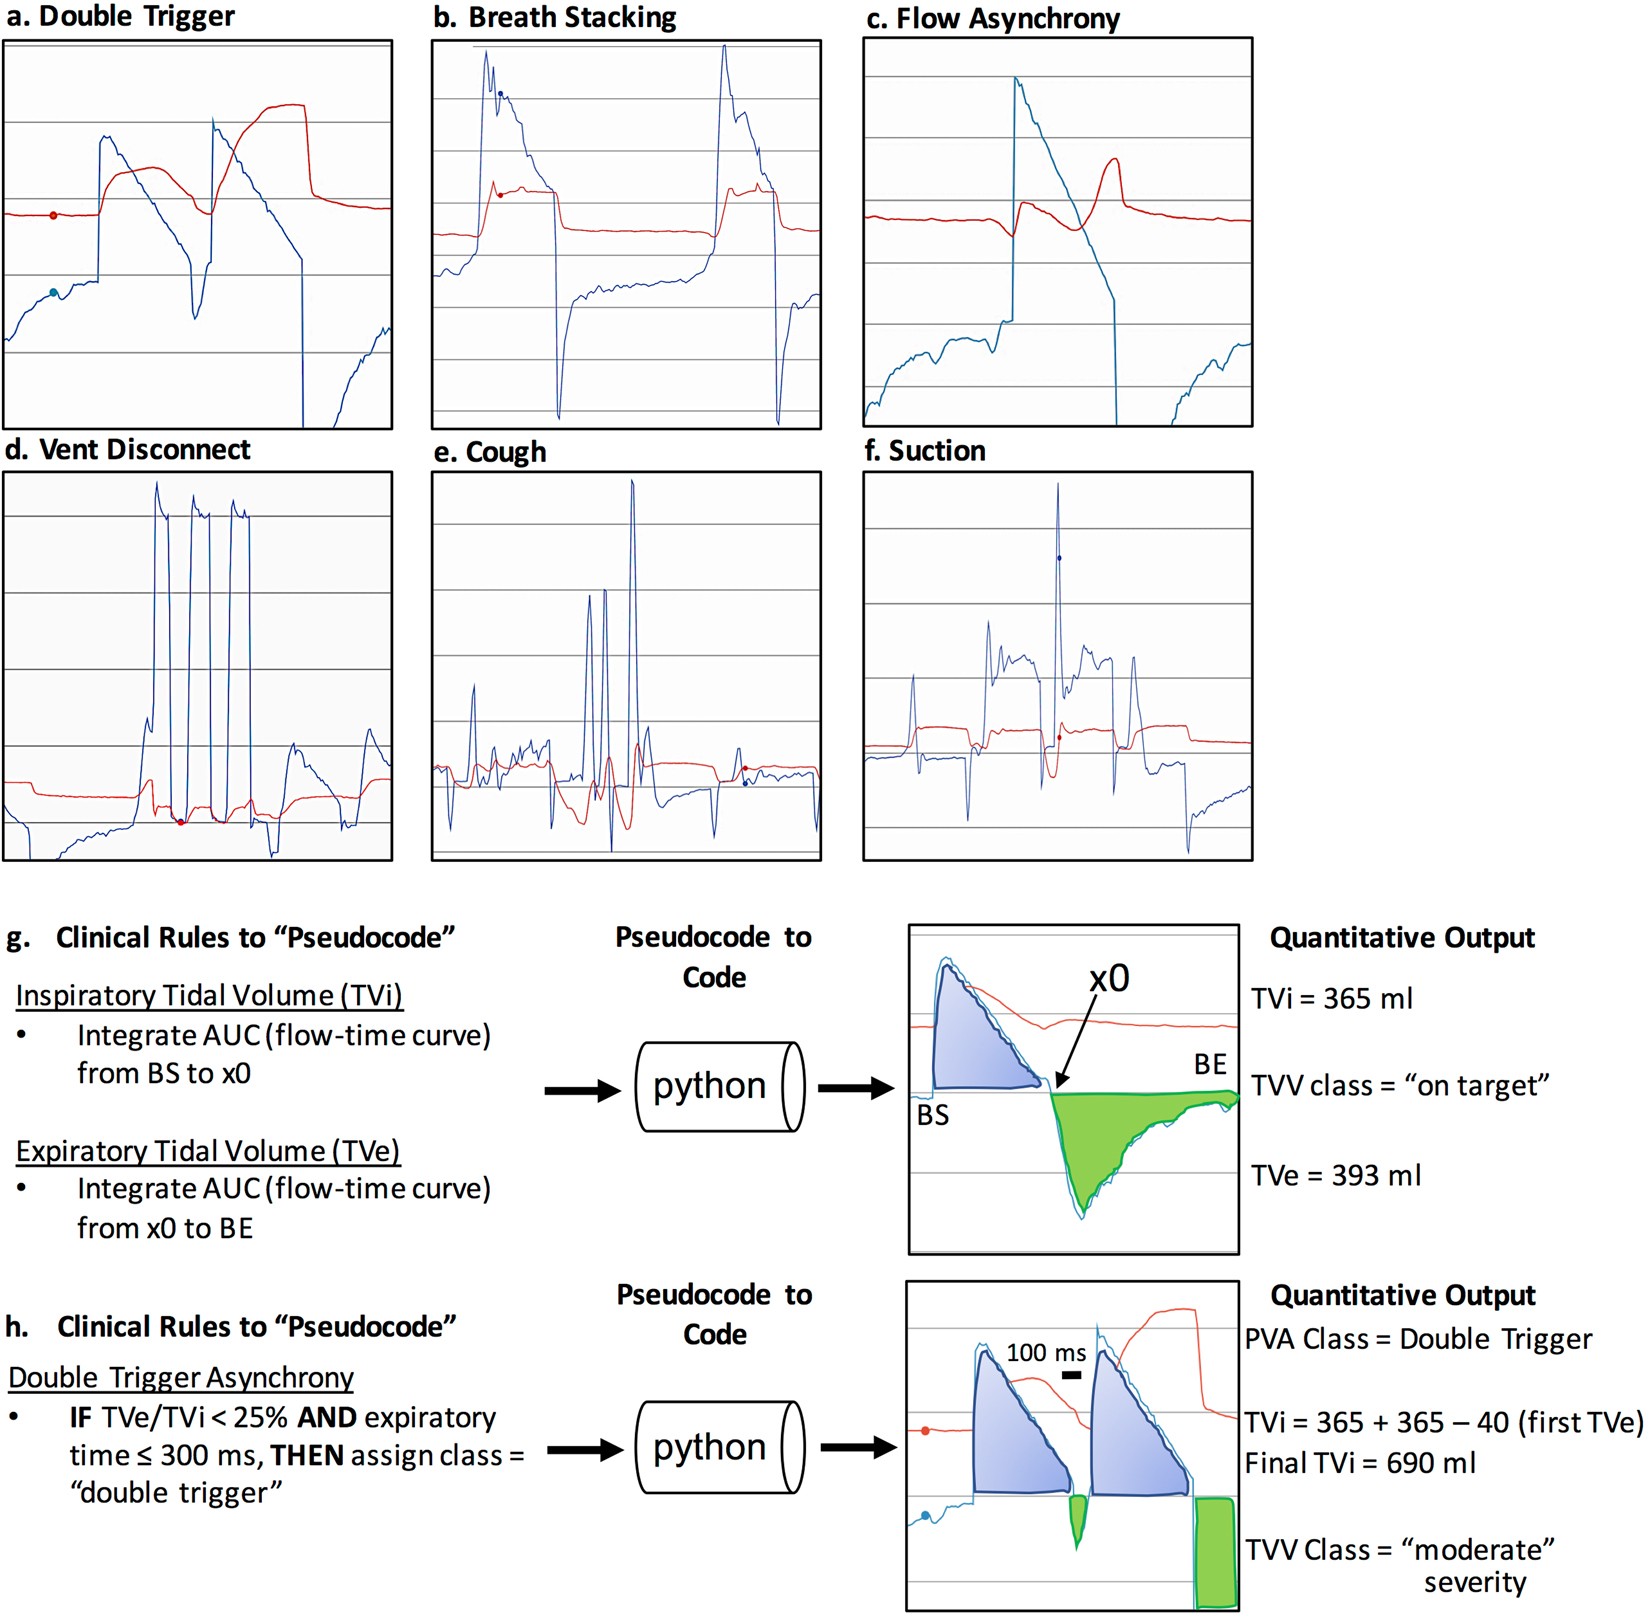 Development and Validation of a Multi-Algorithm Analytic Platform to Detect  Off-Target Mechanical Ventilation | Scientific Reports